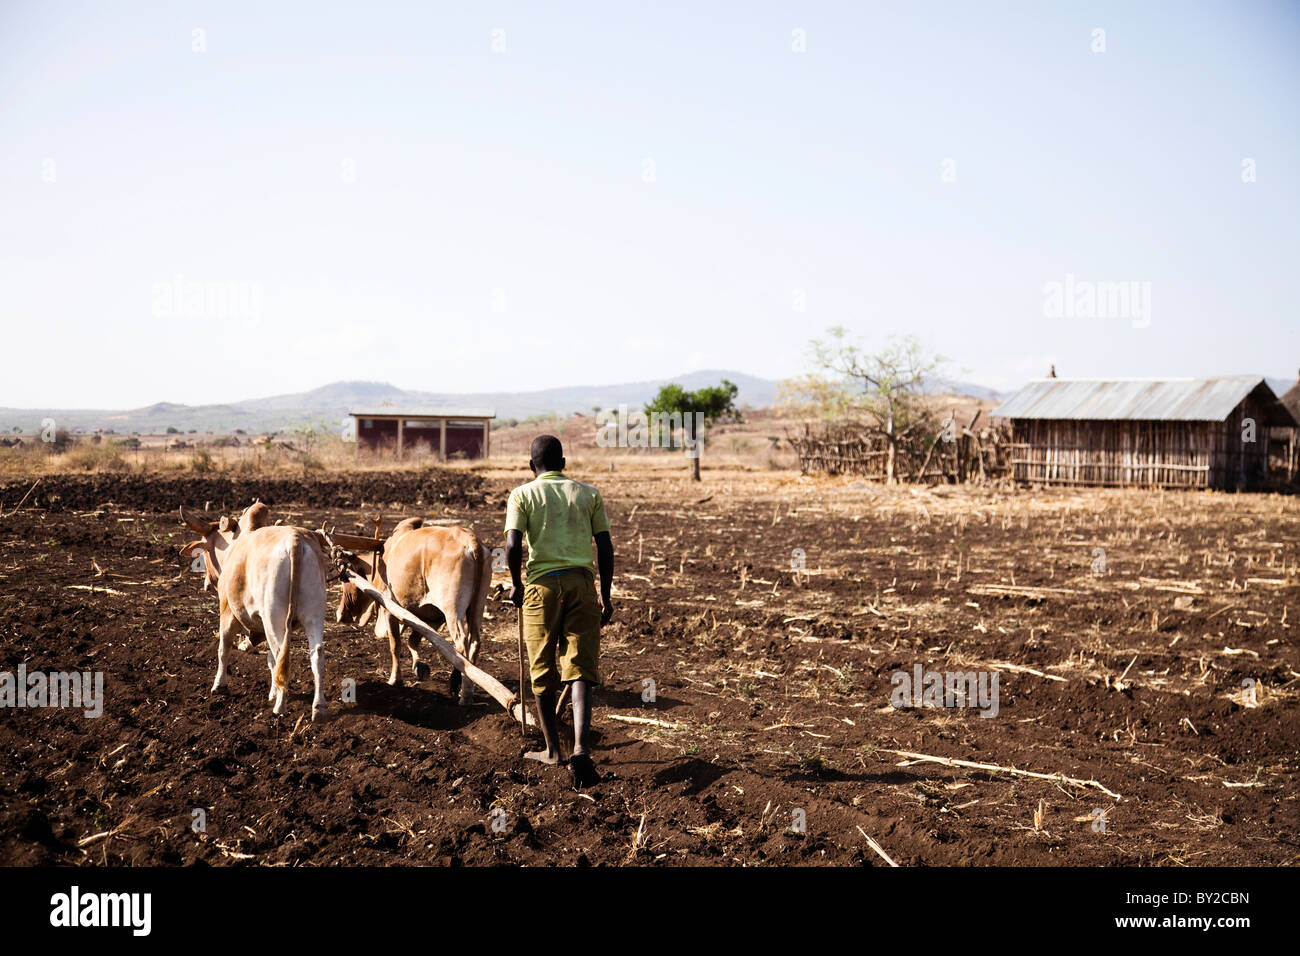 Local farmers work in the field in the remote Omo valley, Ethiopia. Stock Photo